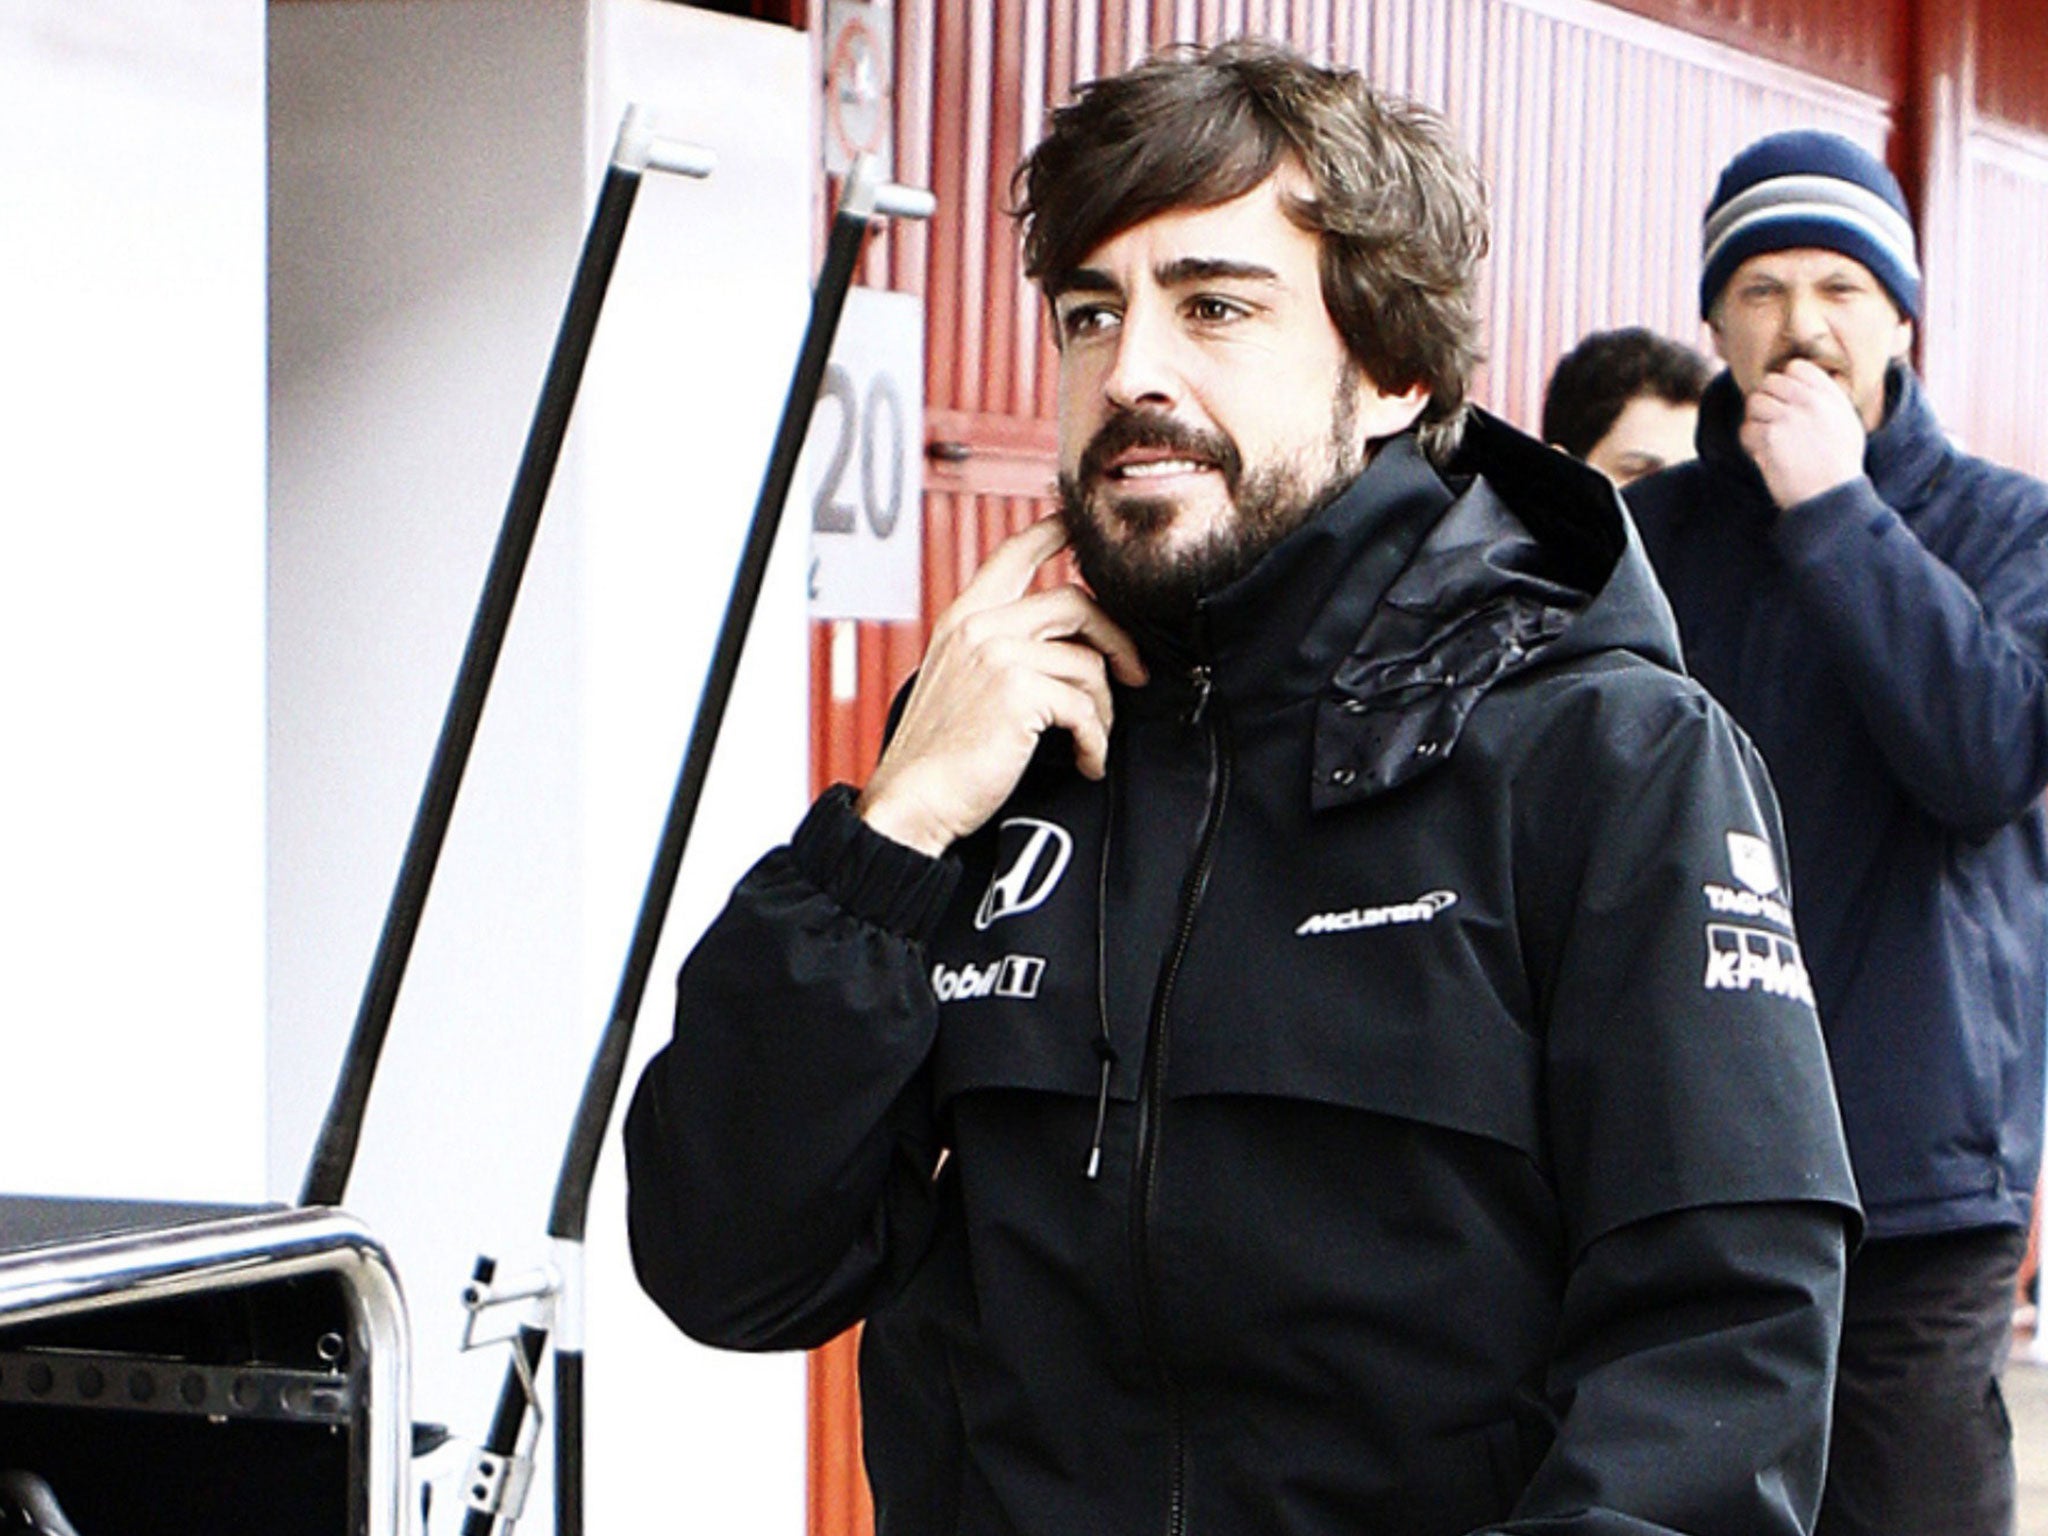 Fernando Alonso enters the circuit on Sunday